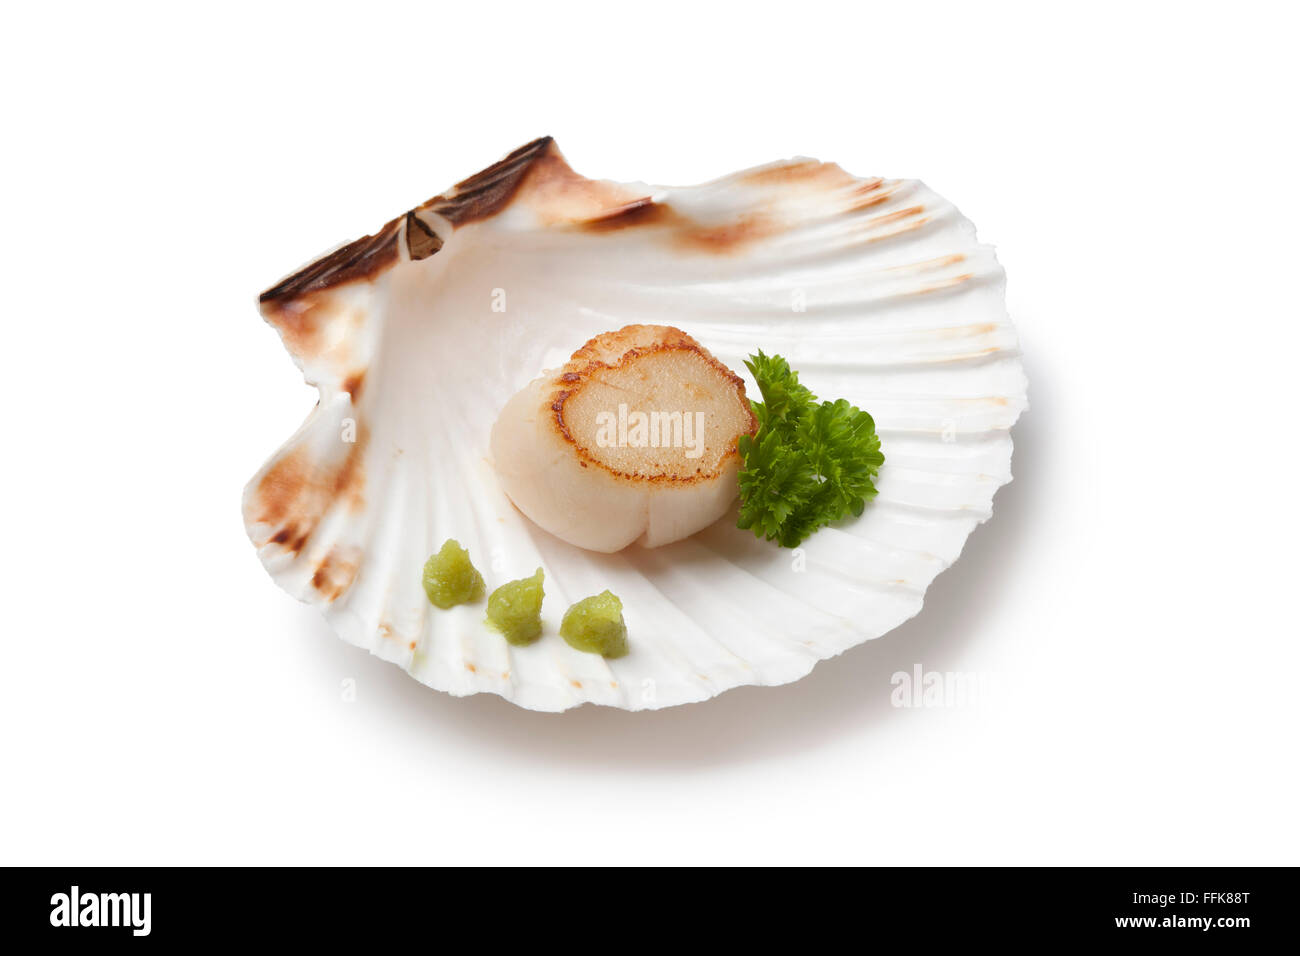 Seared scallop served in a shell with wasabi on white background Stock Photo